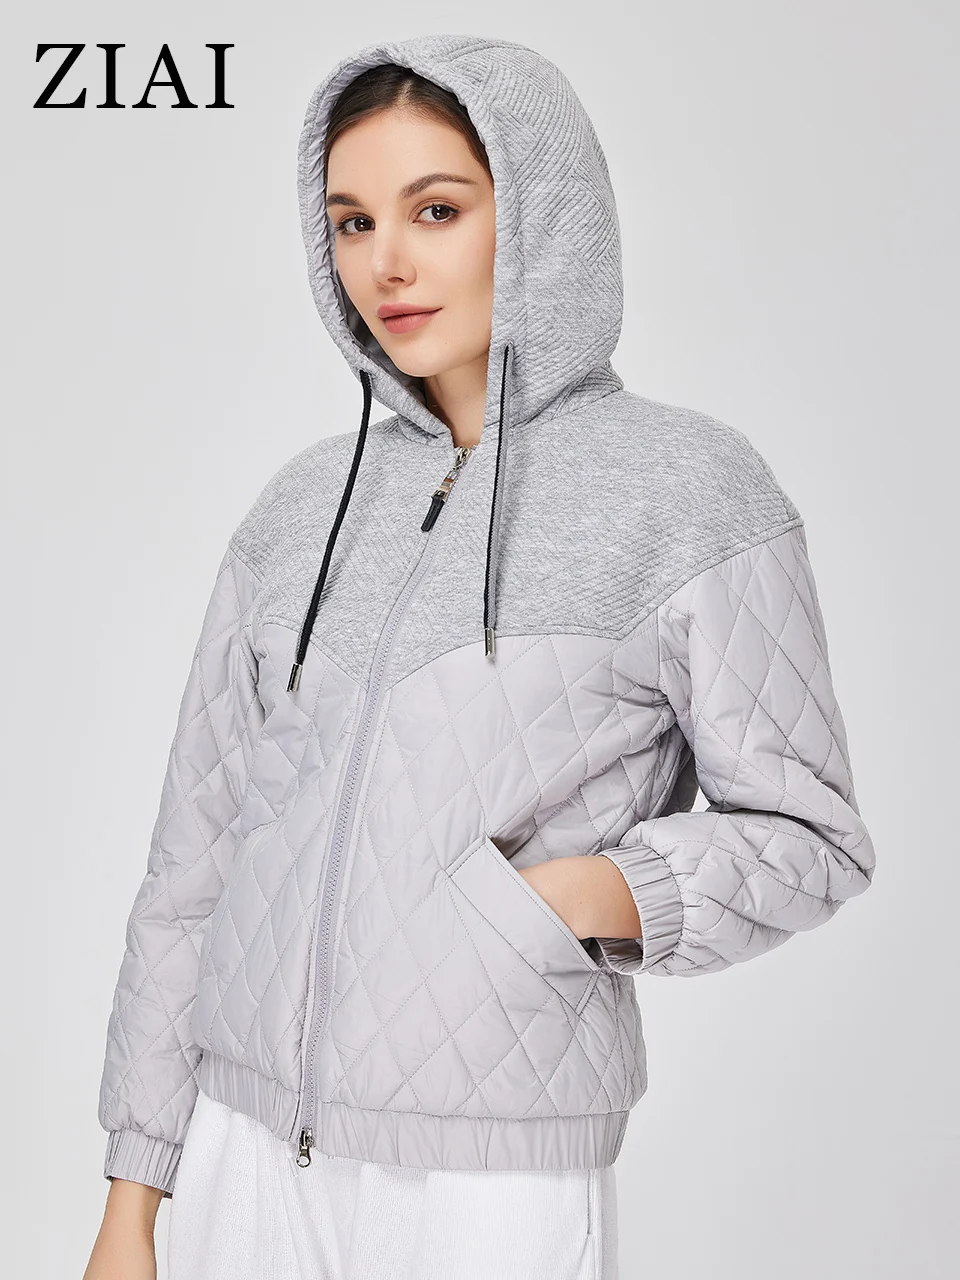 ZIAI New Spring Autumn Short  Women's spring jacket Short Quilted stitching Hooded fashion jackets for women 2023  ZM-20333 enlarge